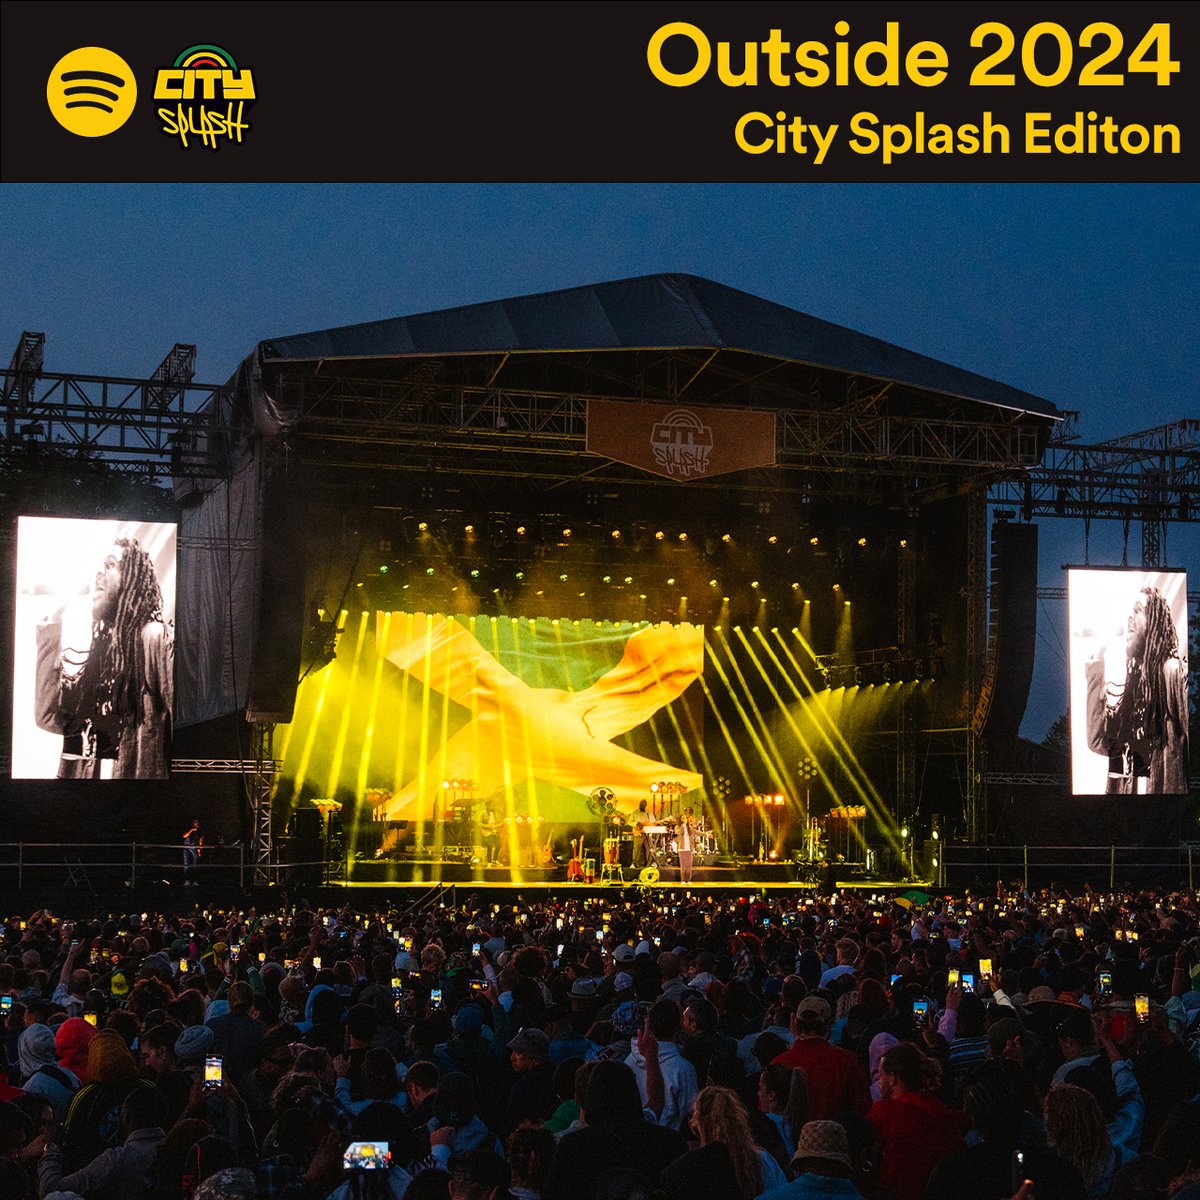 The countdown to City Splash Festival is on! Discover all of the artists on this year’s lineup over on the ‘Outside 2024: City Splash Edition’ @SpotifyUK playlist. Click here to play now: open.spotify.com/playlist/37i9d…... #TheHomeOfCulture